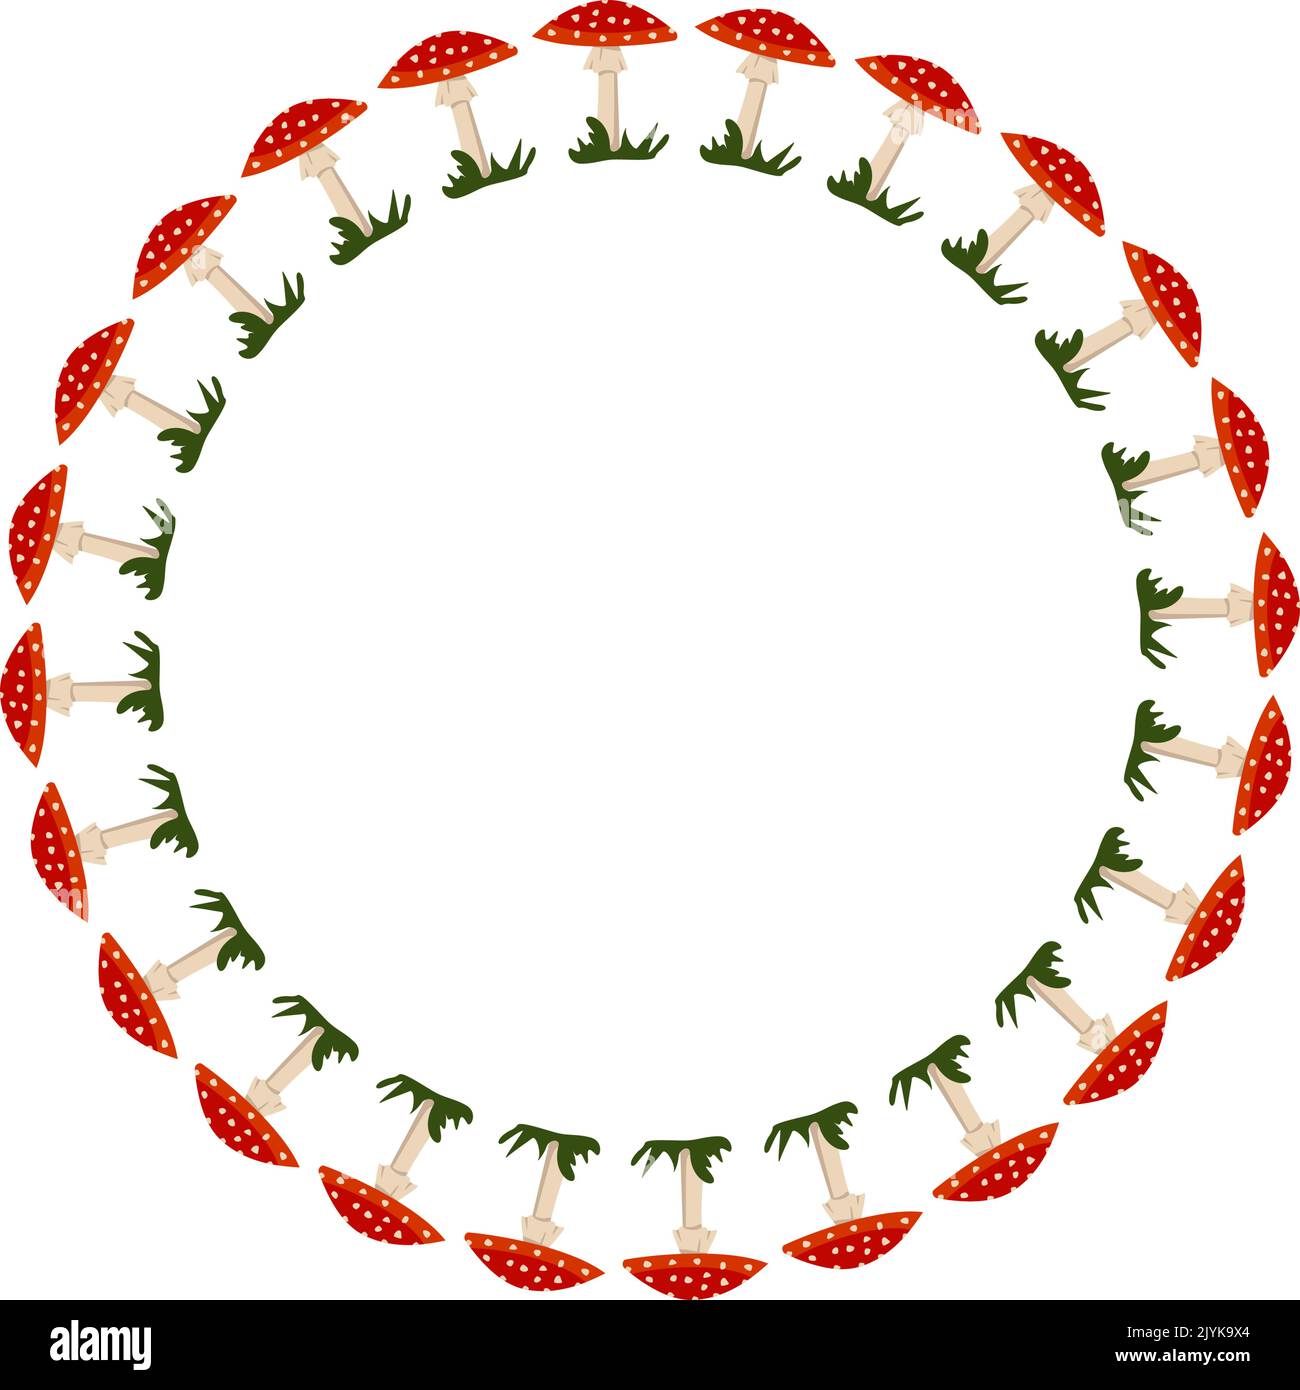 Round frame with red fly agaric mushroom with white dots. Bright autumn wreath with gifts of nature and empty space for text. Decoration for halloween and holiday. Vector flat illustration Stock Vector